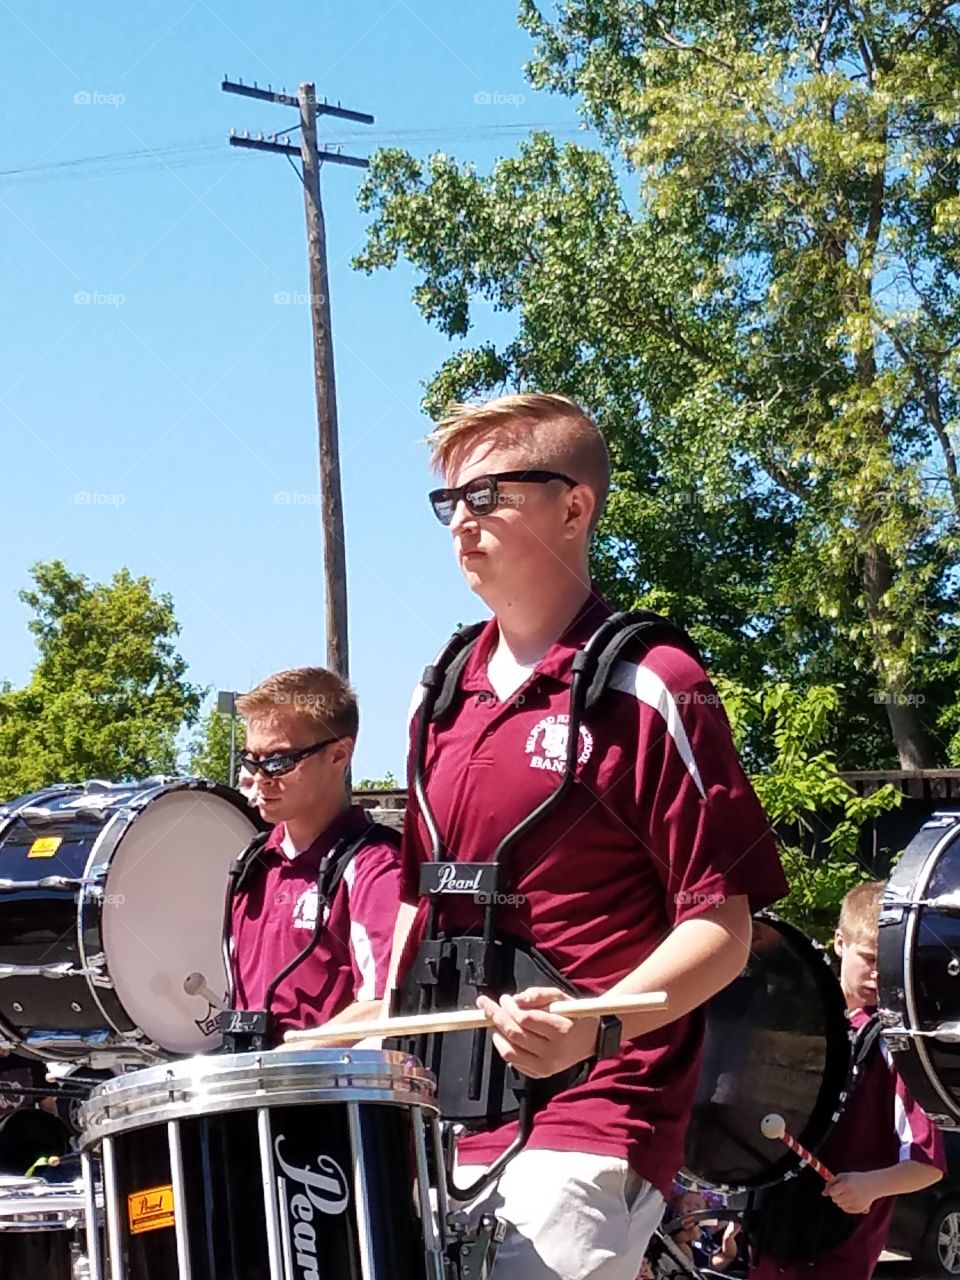 drummer in the marching band